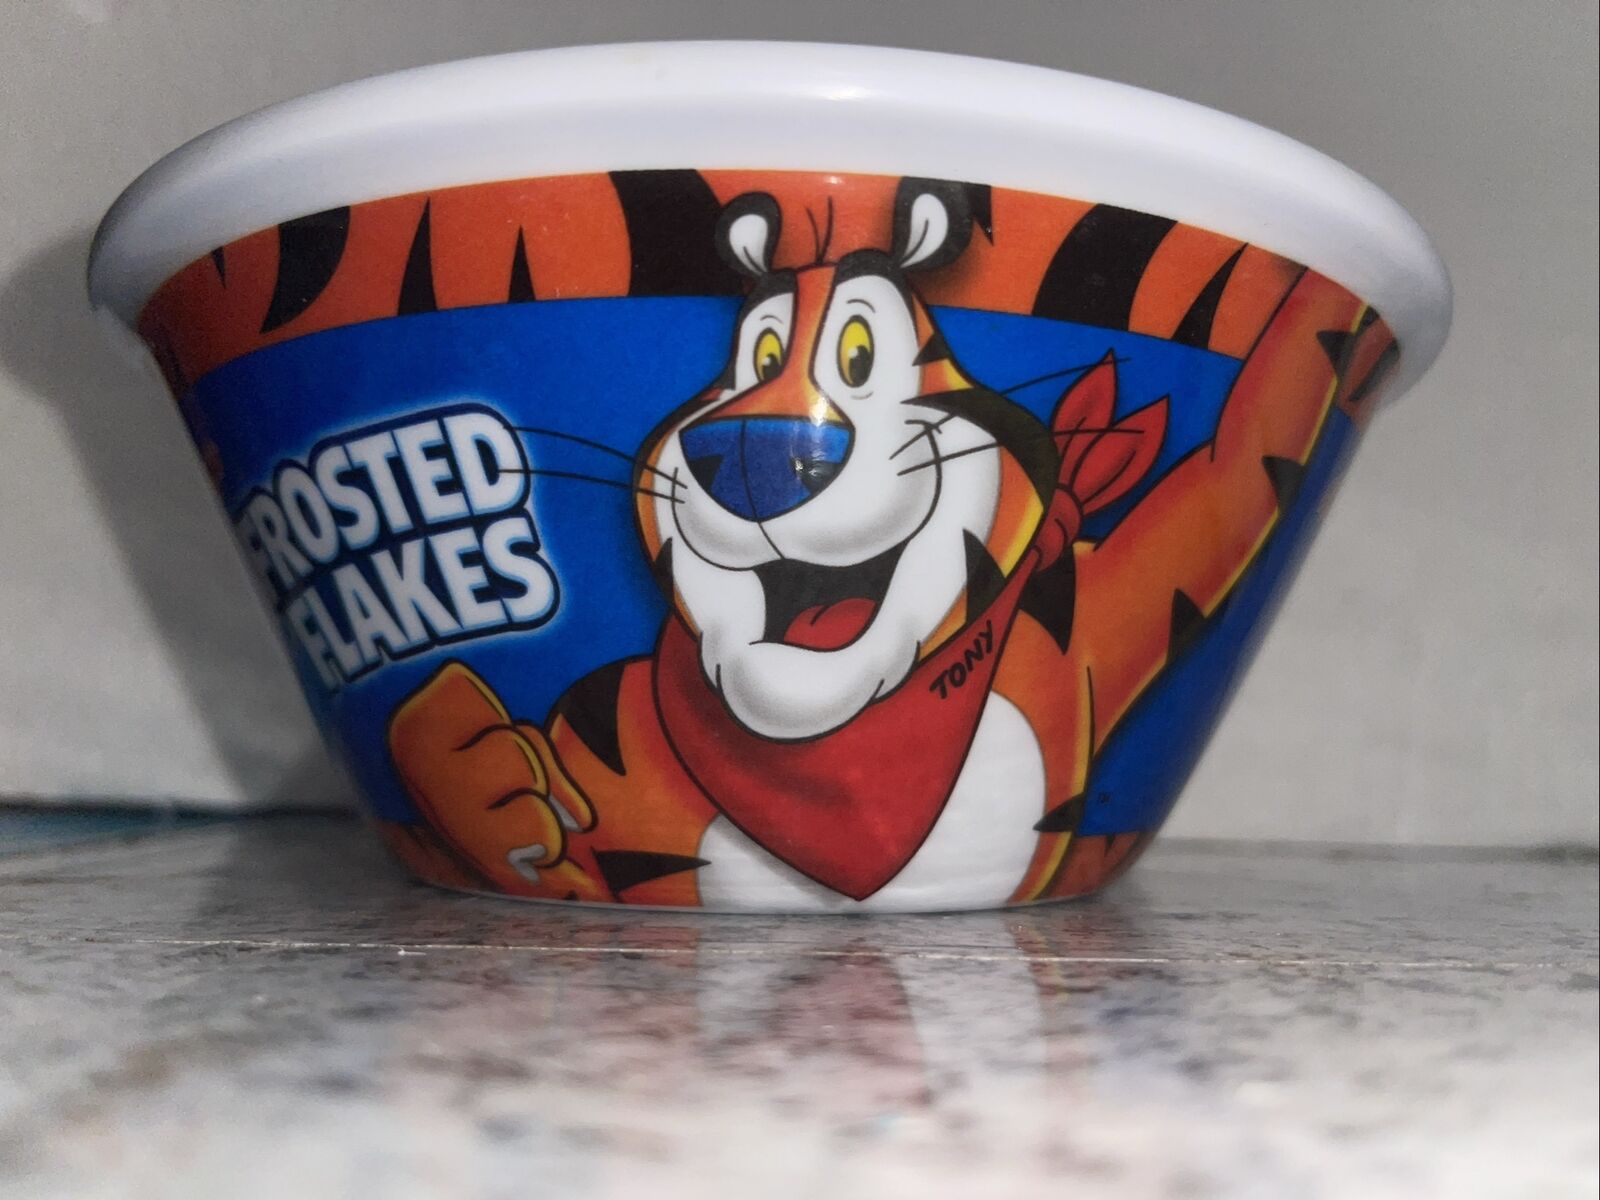 Kellogg’s Frosted Flakes Tony the Tiger Cereal Bowl Melamine (x)